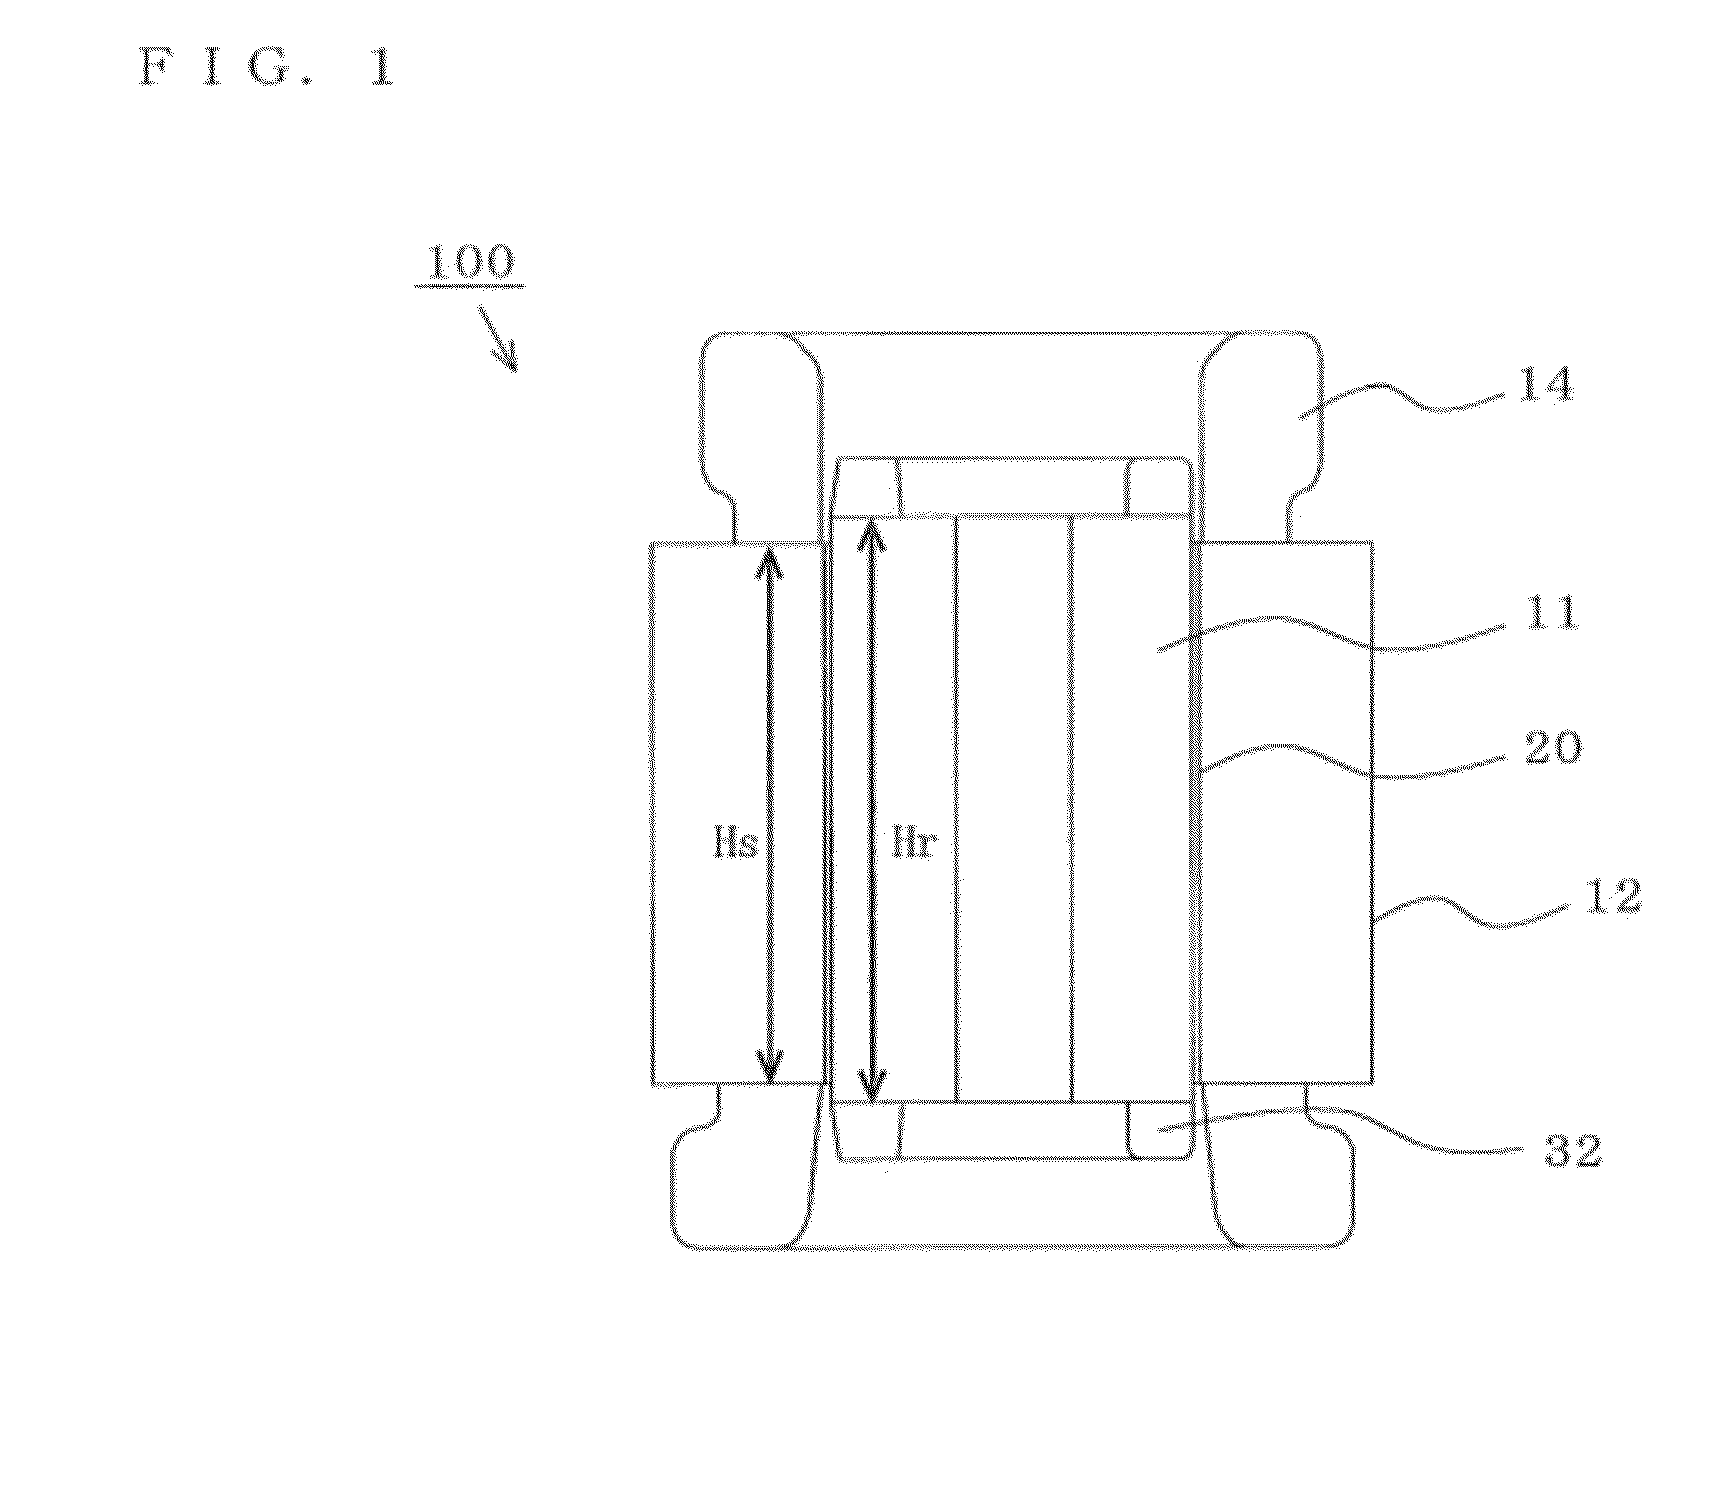 Induction motor, compressor and refrigerating cycle apparatus